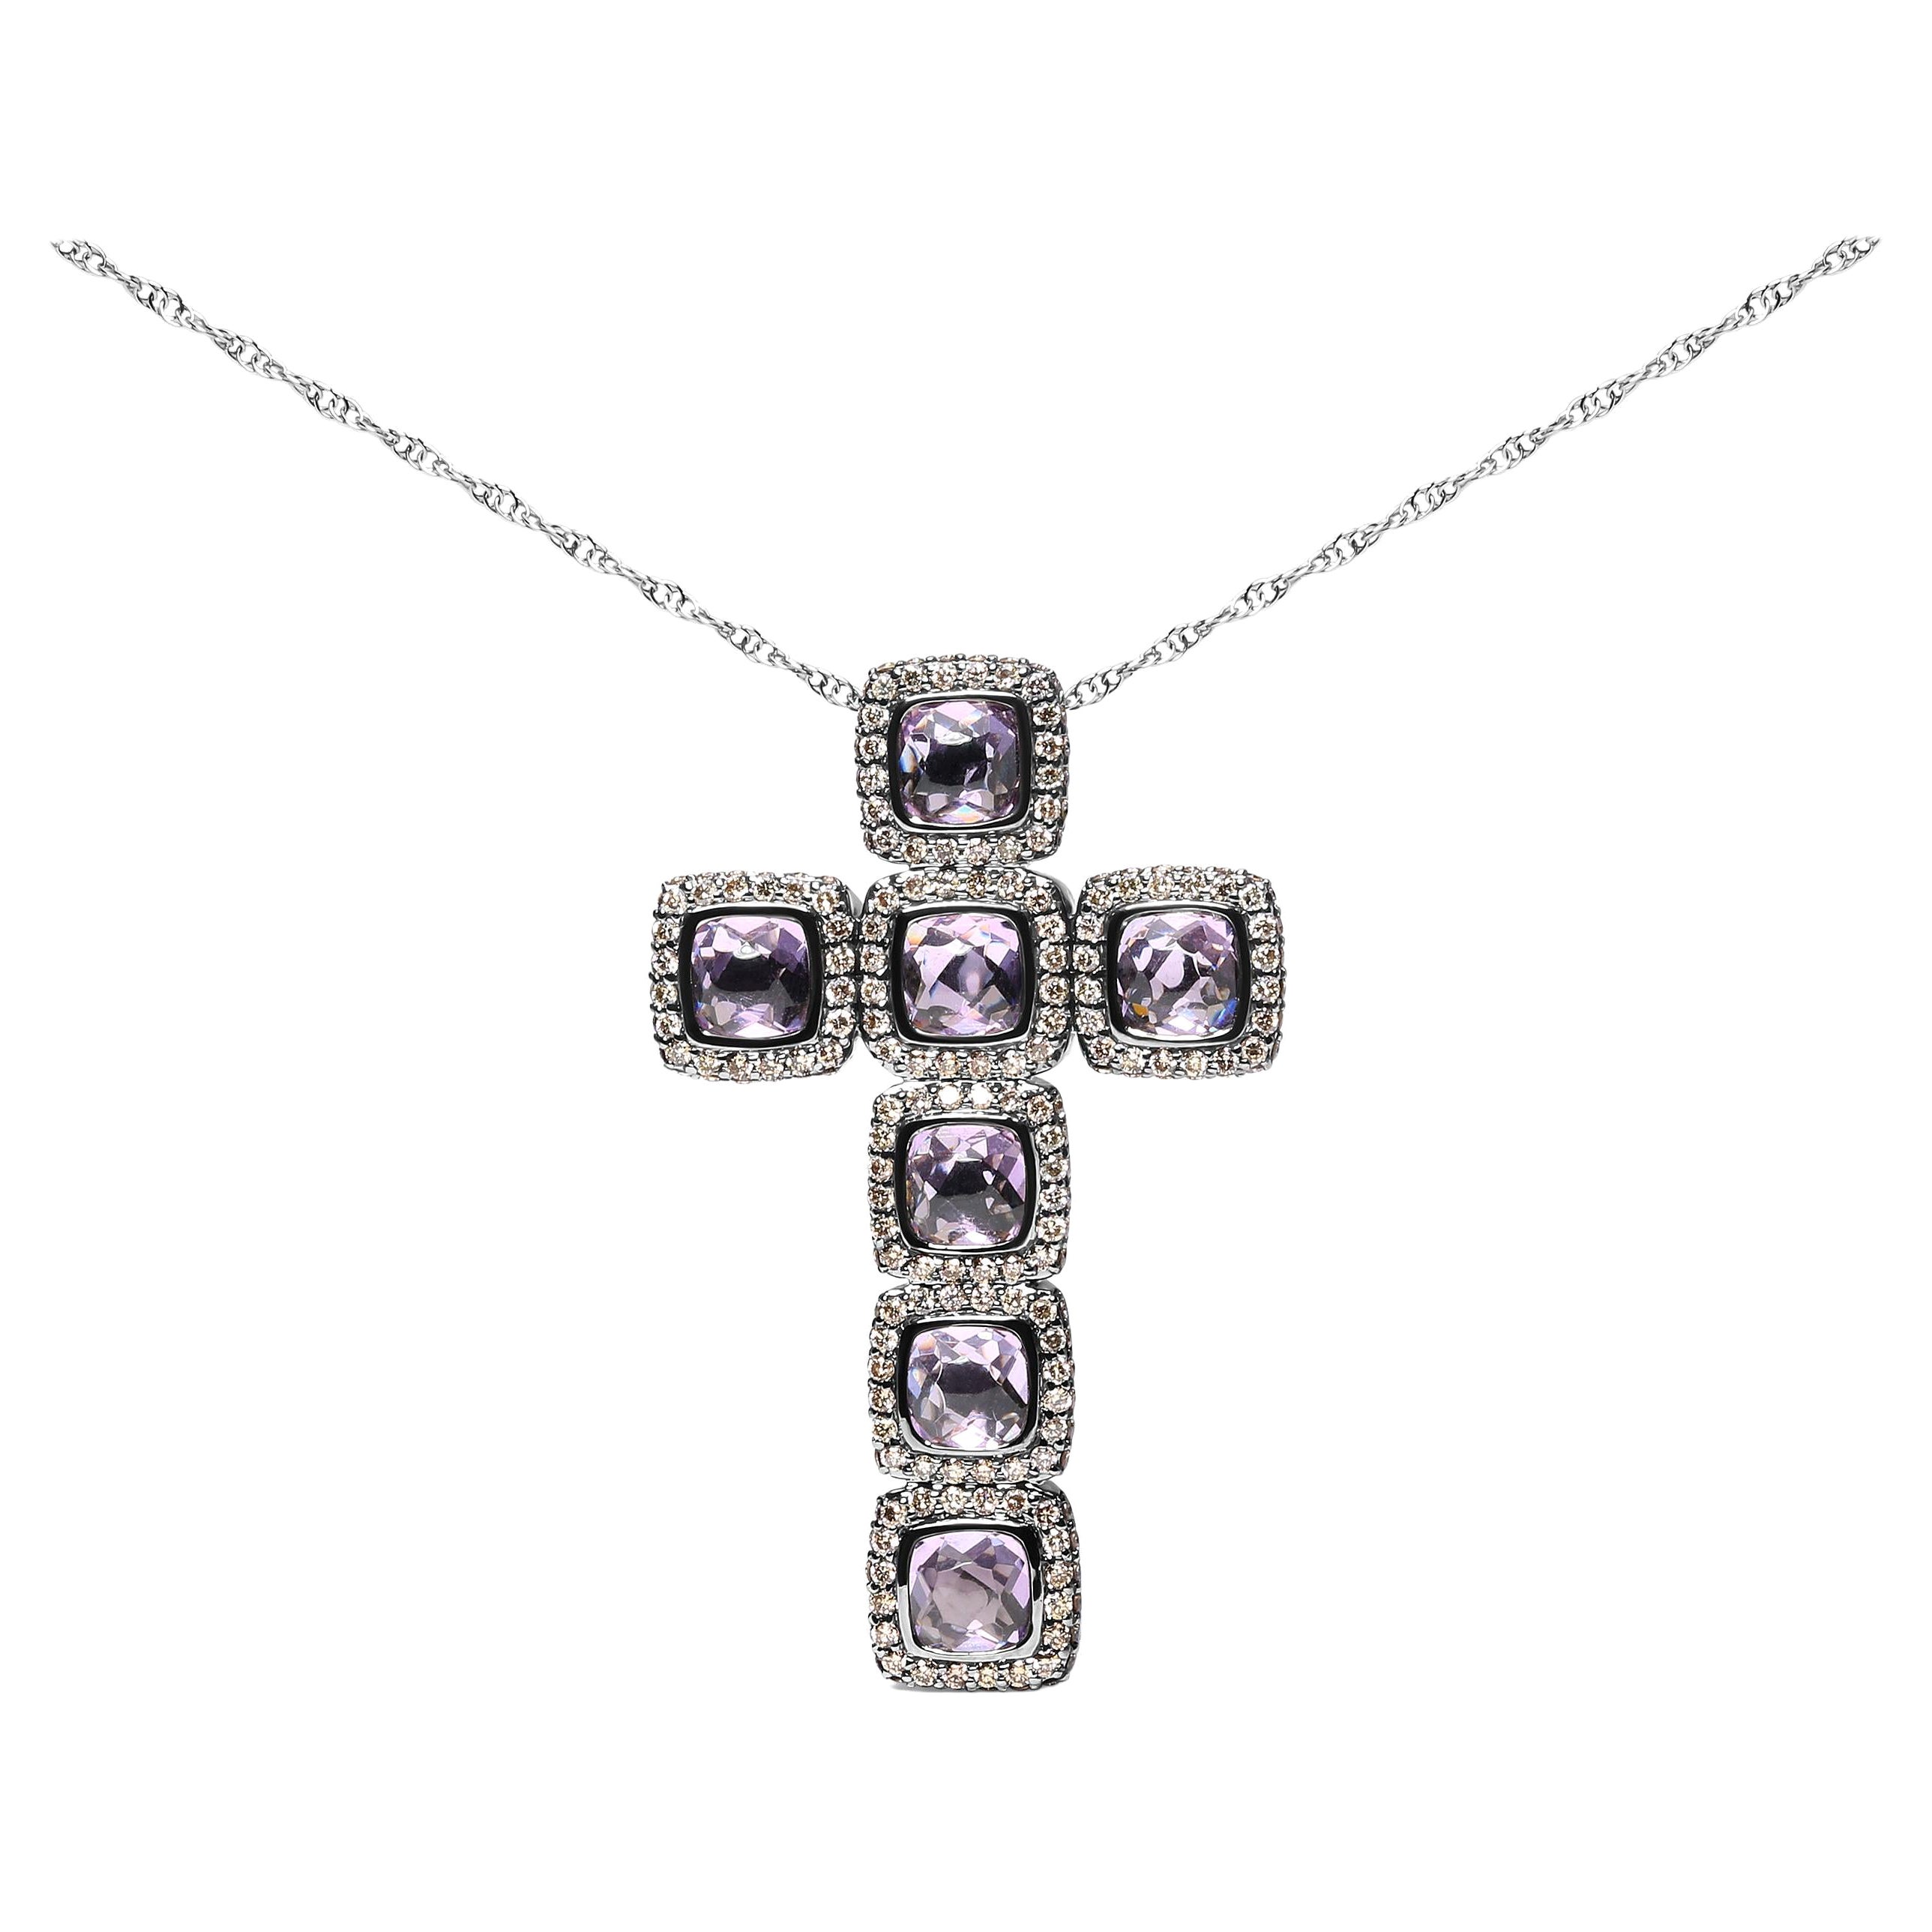 Black Rhodium Over 18K Rose Gold 1.5ct Brown Diamond & Amethyst Pendant Necklace For Sale